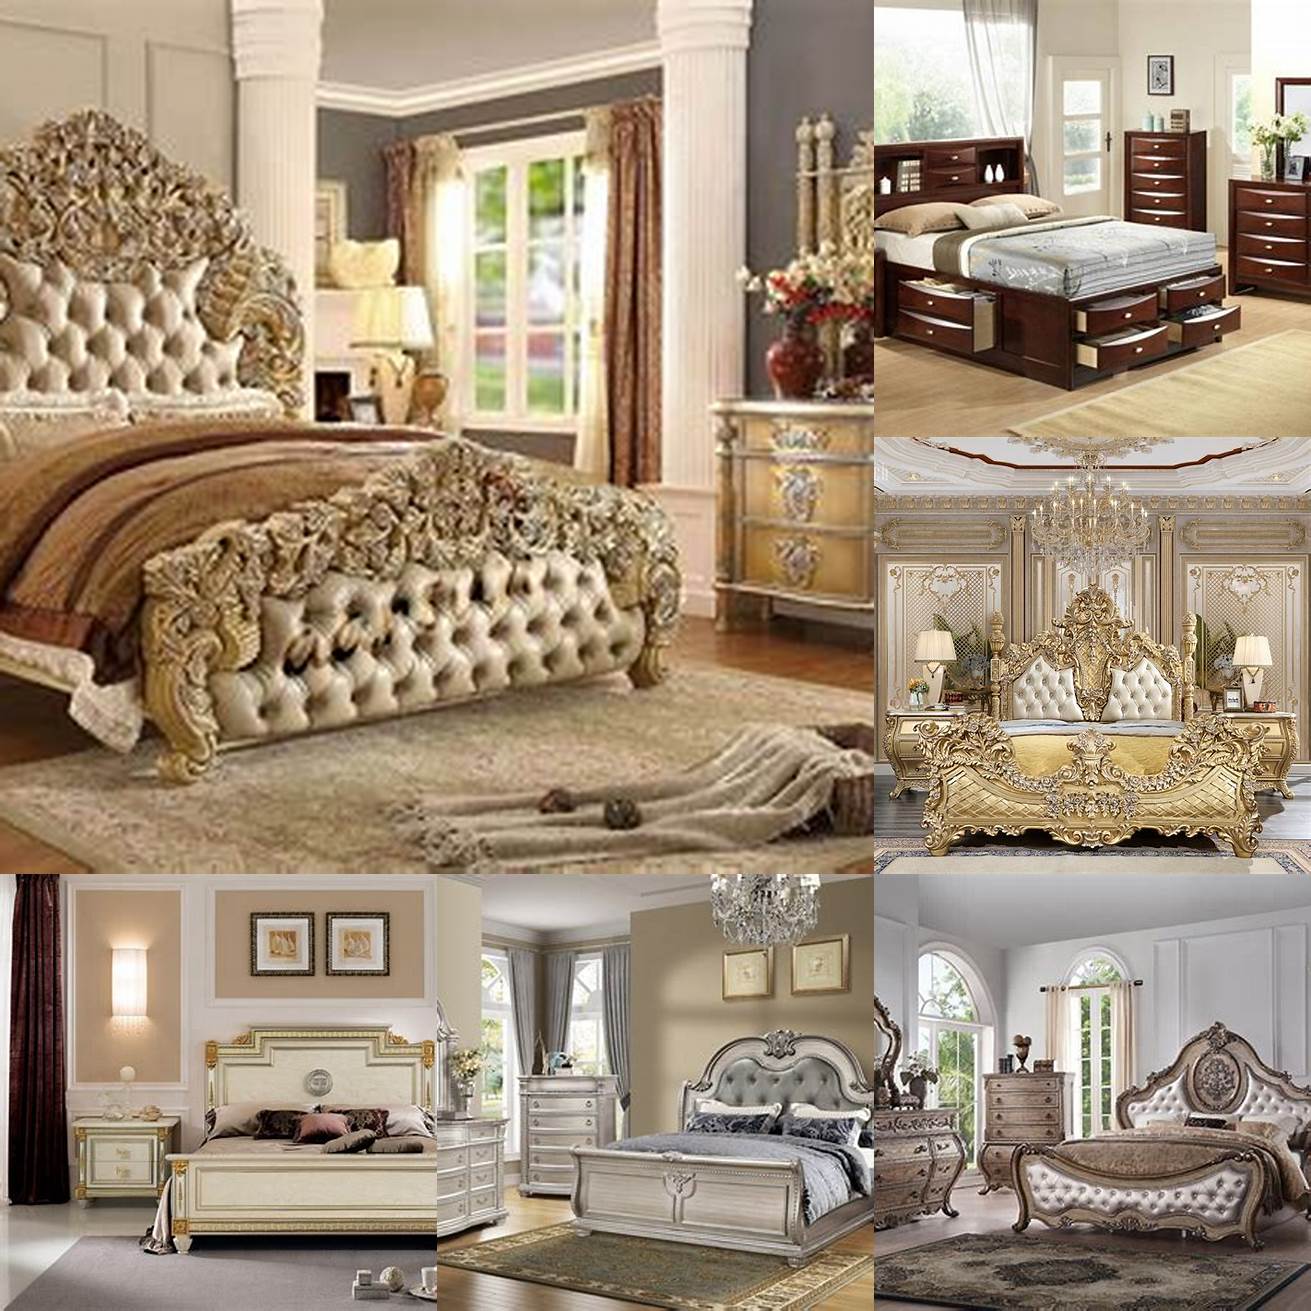 Quality Luxury bedroom sets are made from high-quality materials that are built to last You can expect your set to withstand daily wear and tear and remain in excellent condition for years to come